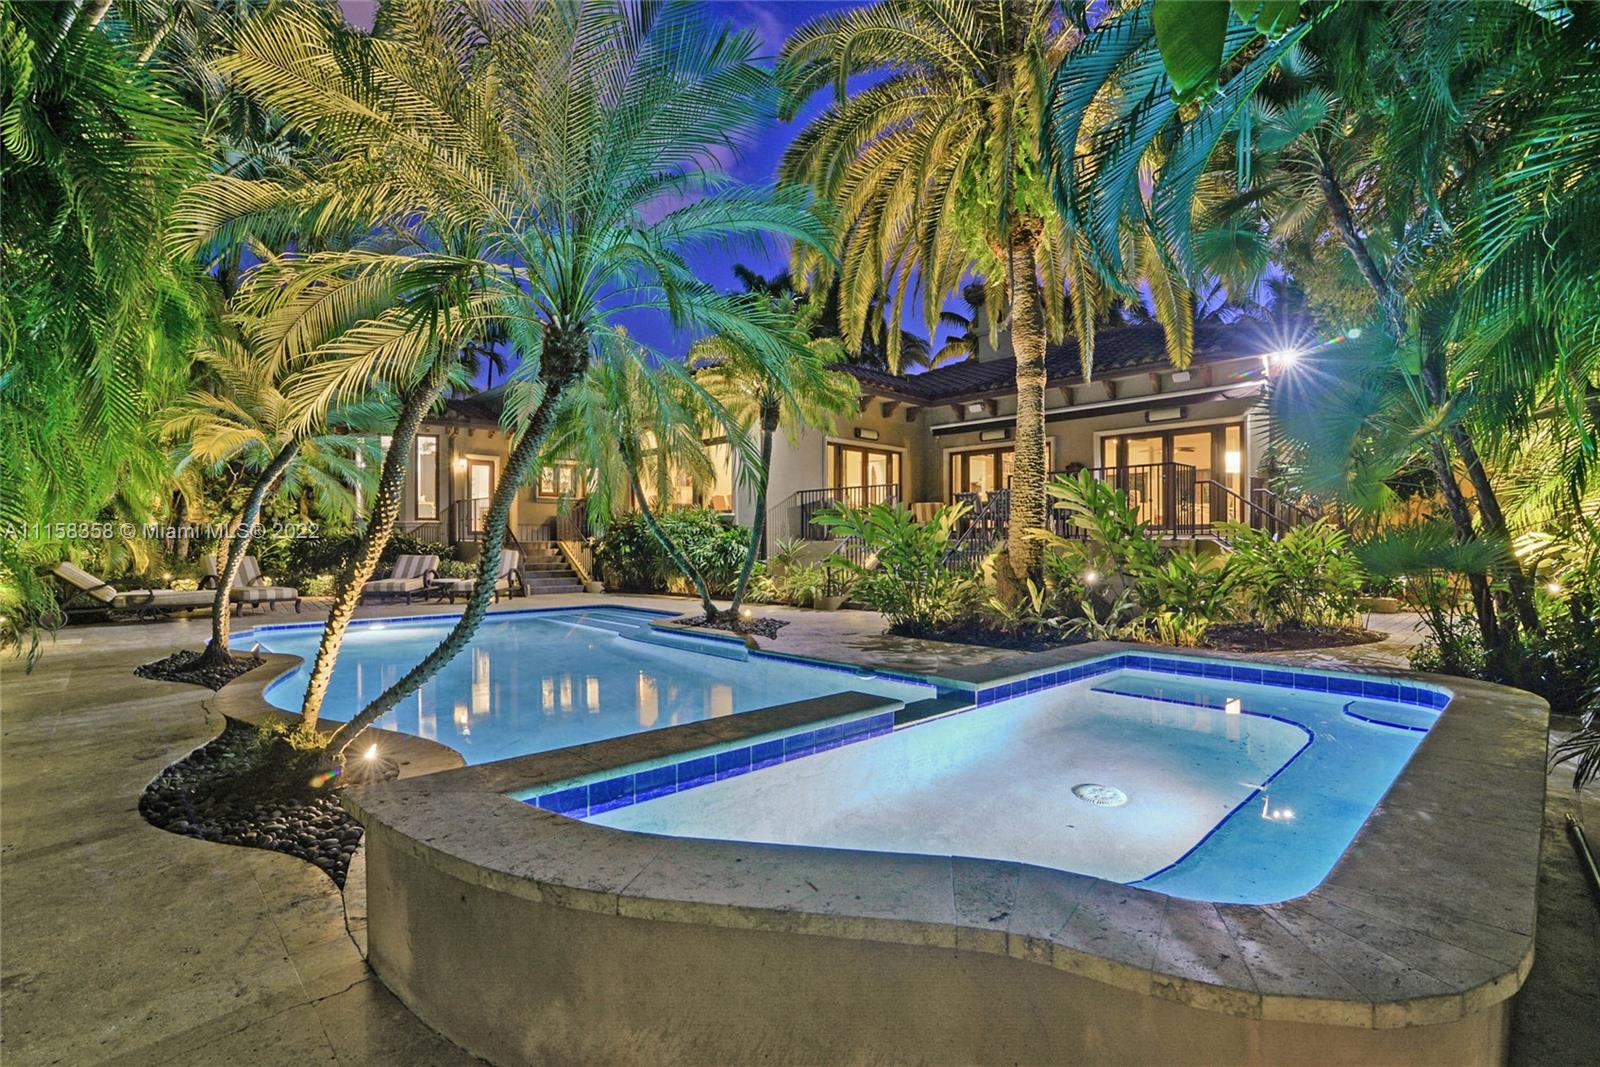 A luxury estate at its finest, in the private gated-Sagamore Cove Estates. A one-of-a-kind property sitting on 2.5 lots & 125-ft of waterfront on a canal off the New River waterway. Nestled in an exclusive private enclave of only 7 residences, this prime location is a short-walk to Las Olas. This lavish home w 5 ensuite bdrms 5.5 baths w top of the line LaFinestra windows, fireplace, oak floors&boasts 11ft ceilings. The 3 car garage could be transformed into livable space with A/C, as it is in pristine condition w storage & can be used as a separate entrance. An epicurean's dream kitchen featuring a restaurant grade 6-burner Garland gas range&2 separate sinks. Winding garden walkways, heated saltwater pool. Extremely detailed craftsmanship w the 3/4 of the home being newer construction.